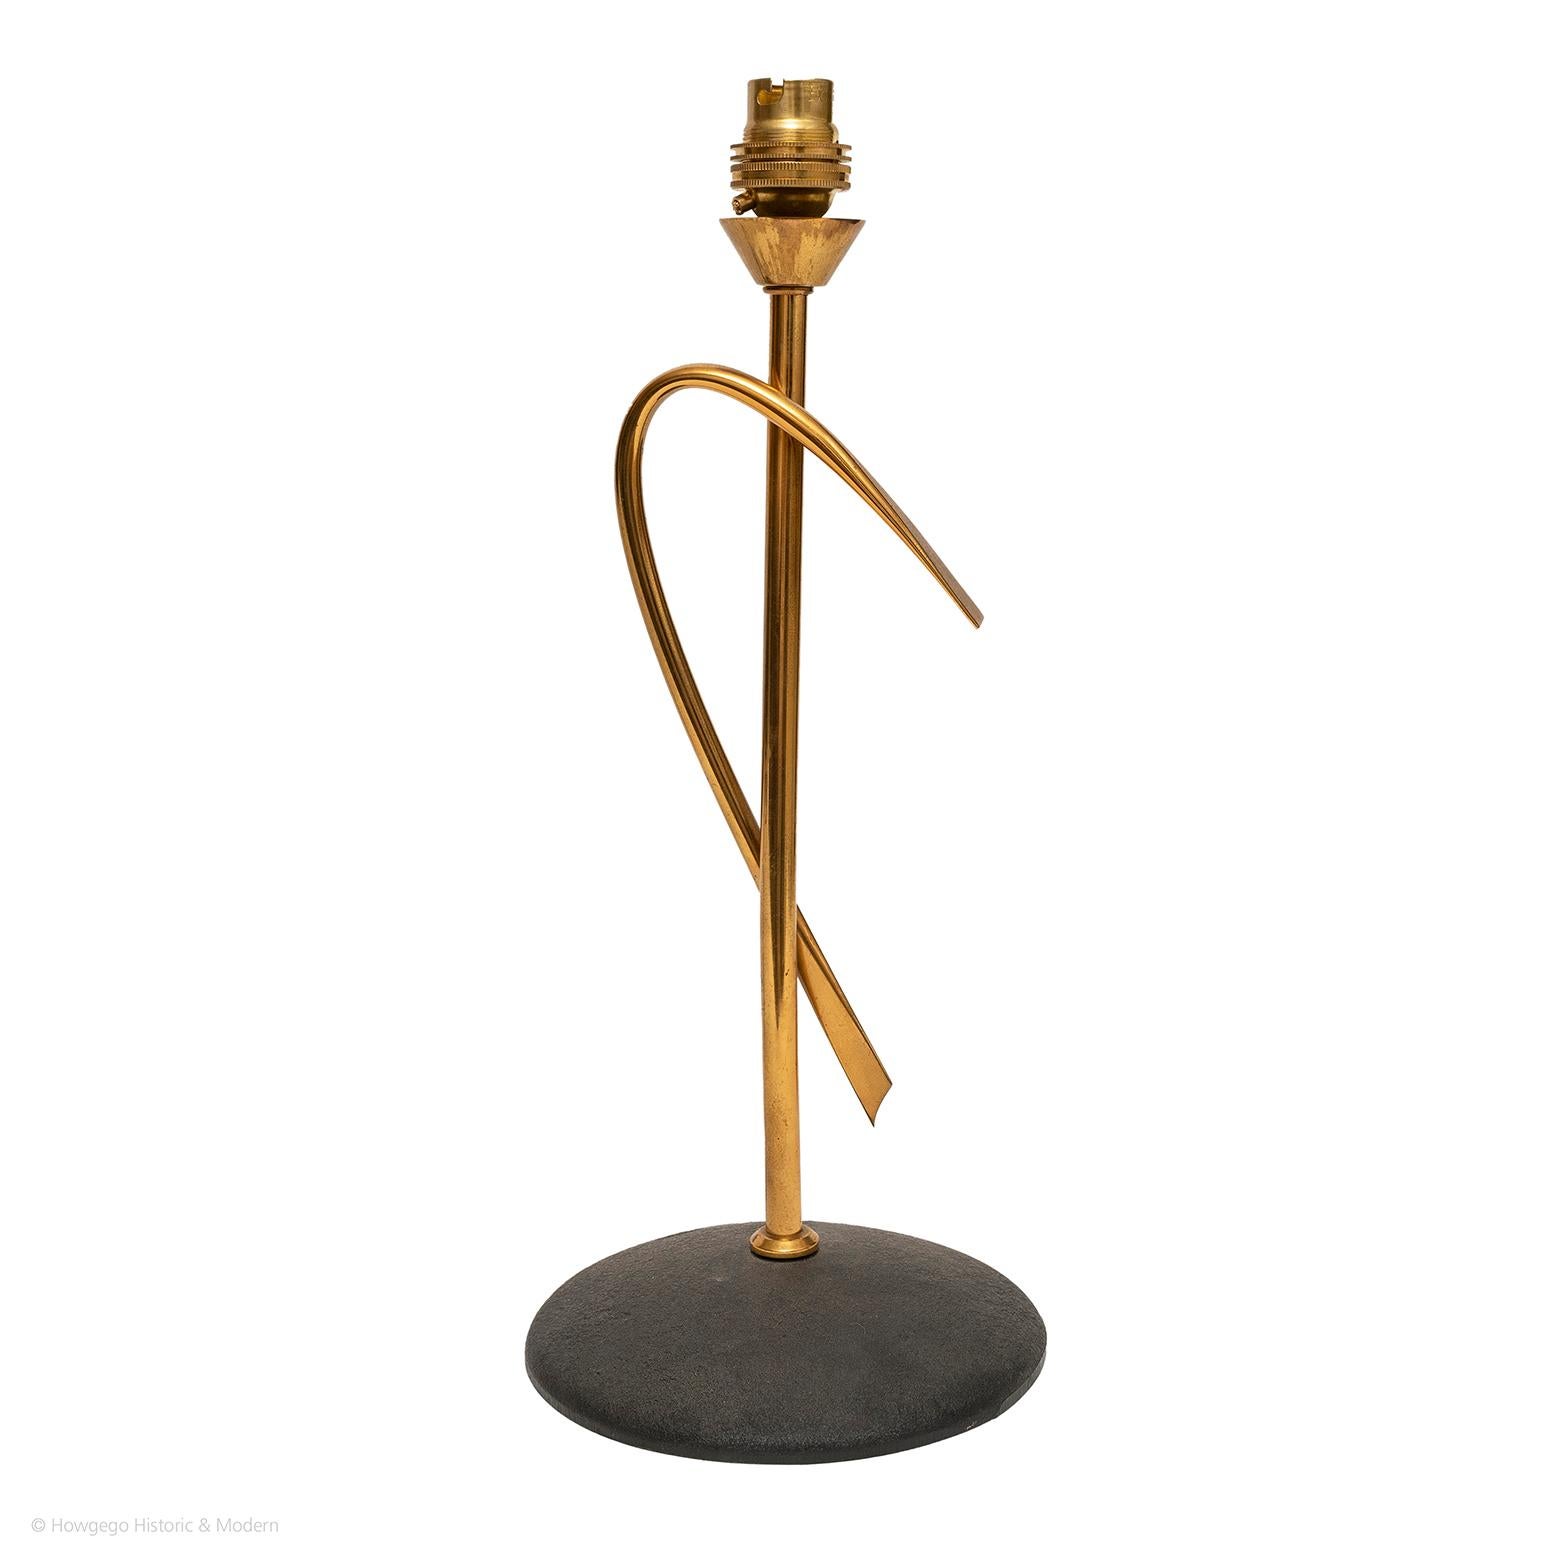 A Stylised, Mid-Century Modern, French brass and black metal, arc, table lamp
The brass arc creates a classic yet stylised aesthetic, inspired by a design by Jean-Michel Frank
Classic modern elegance which will blend and sit comfortably in period,